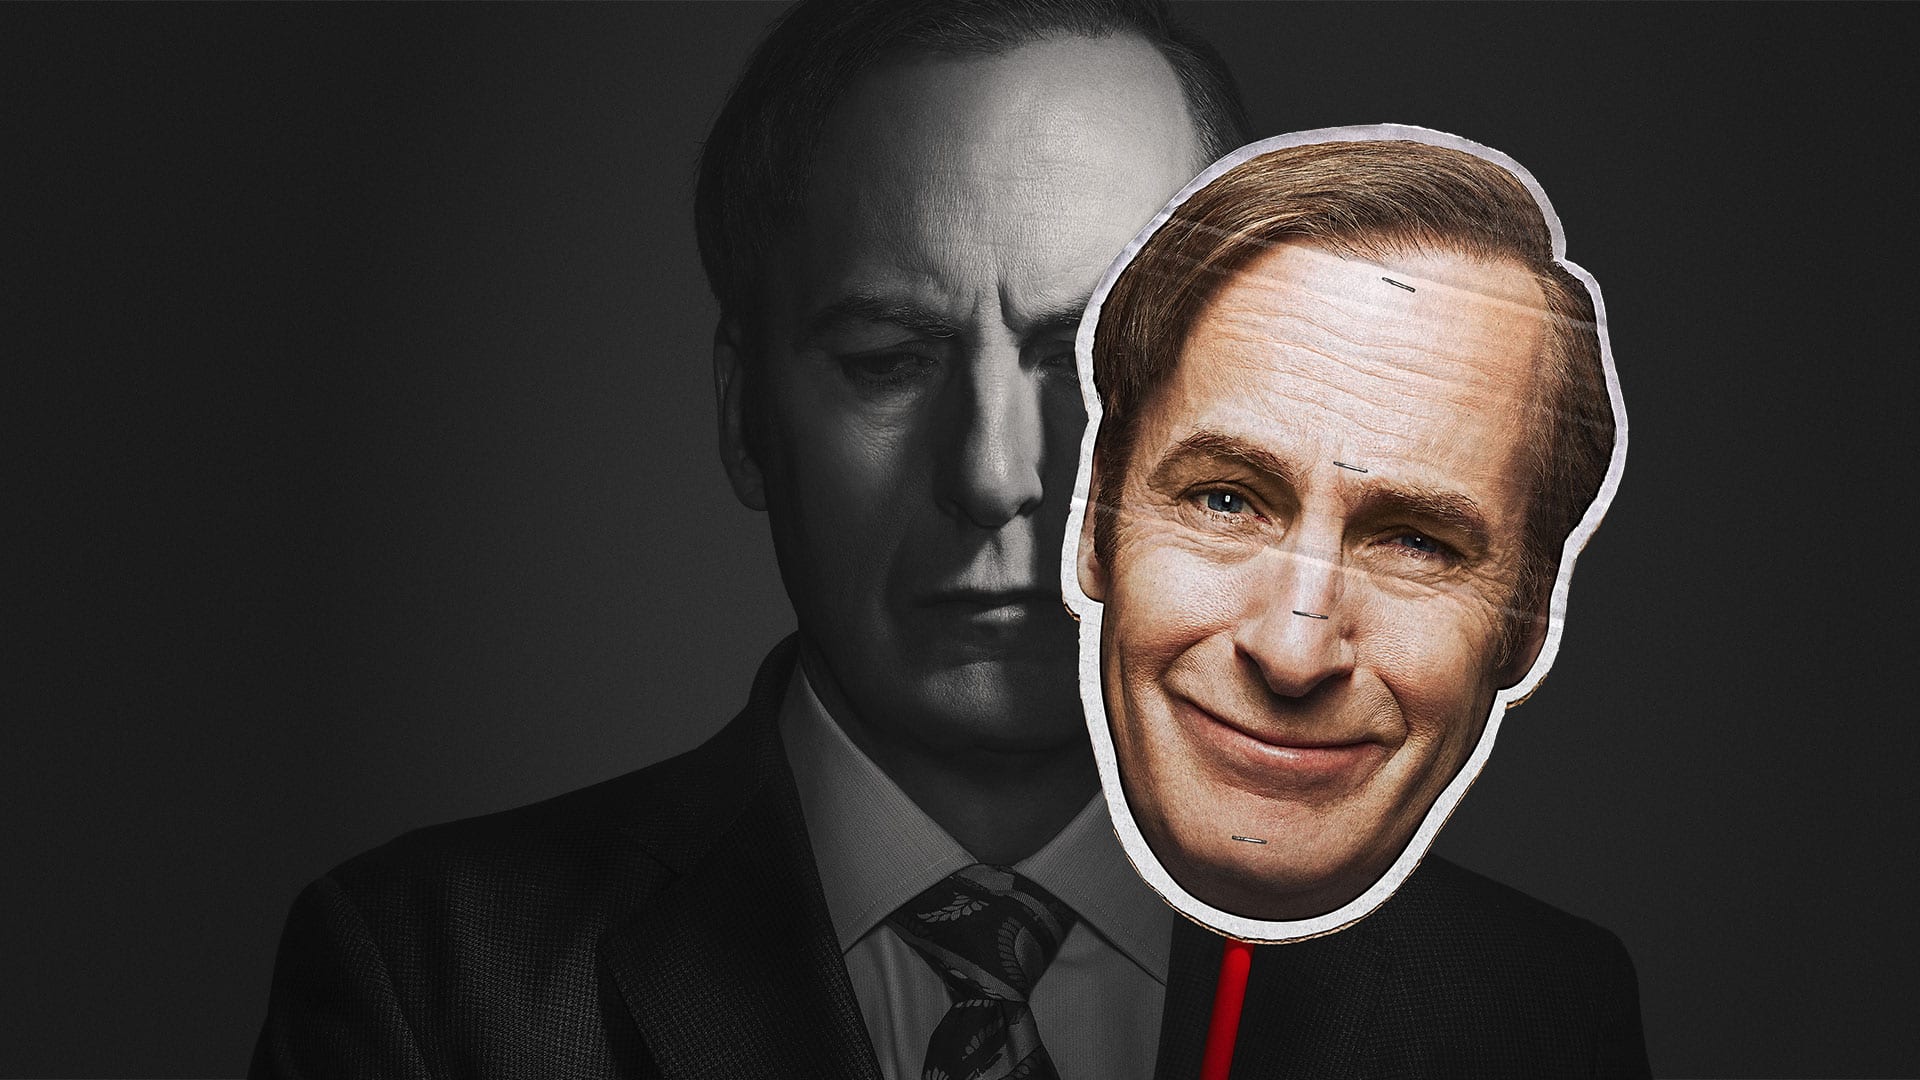 Better Call Saul Season 5 Reviews Saul Goodman is Here to Steal the Show